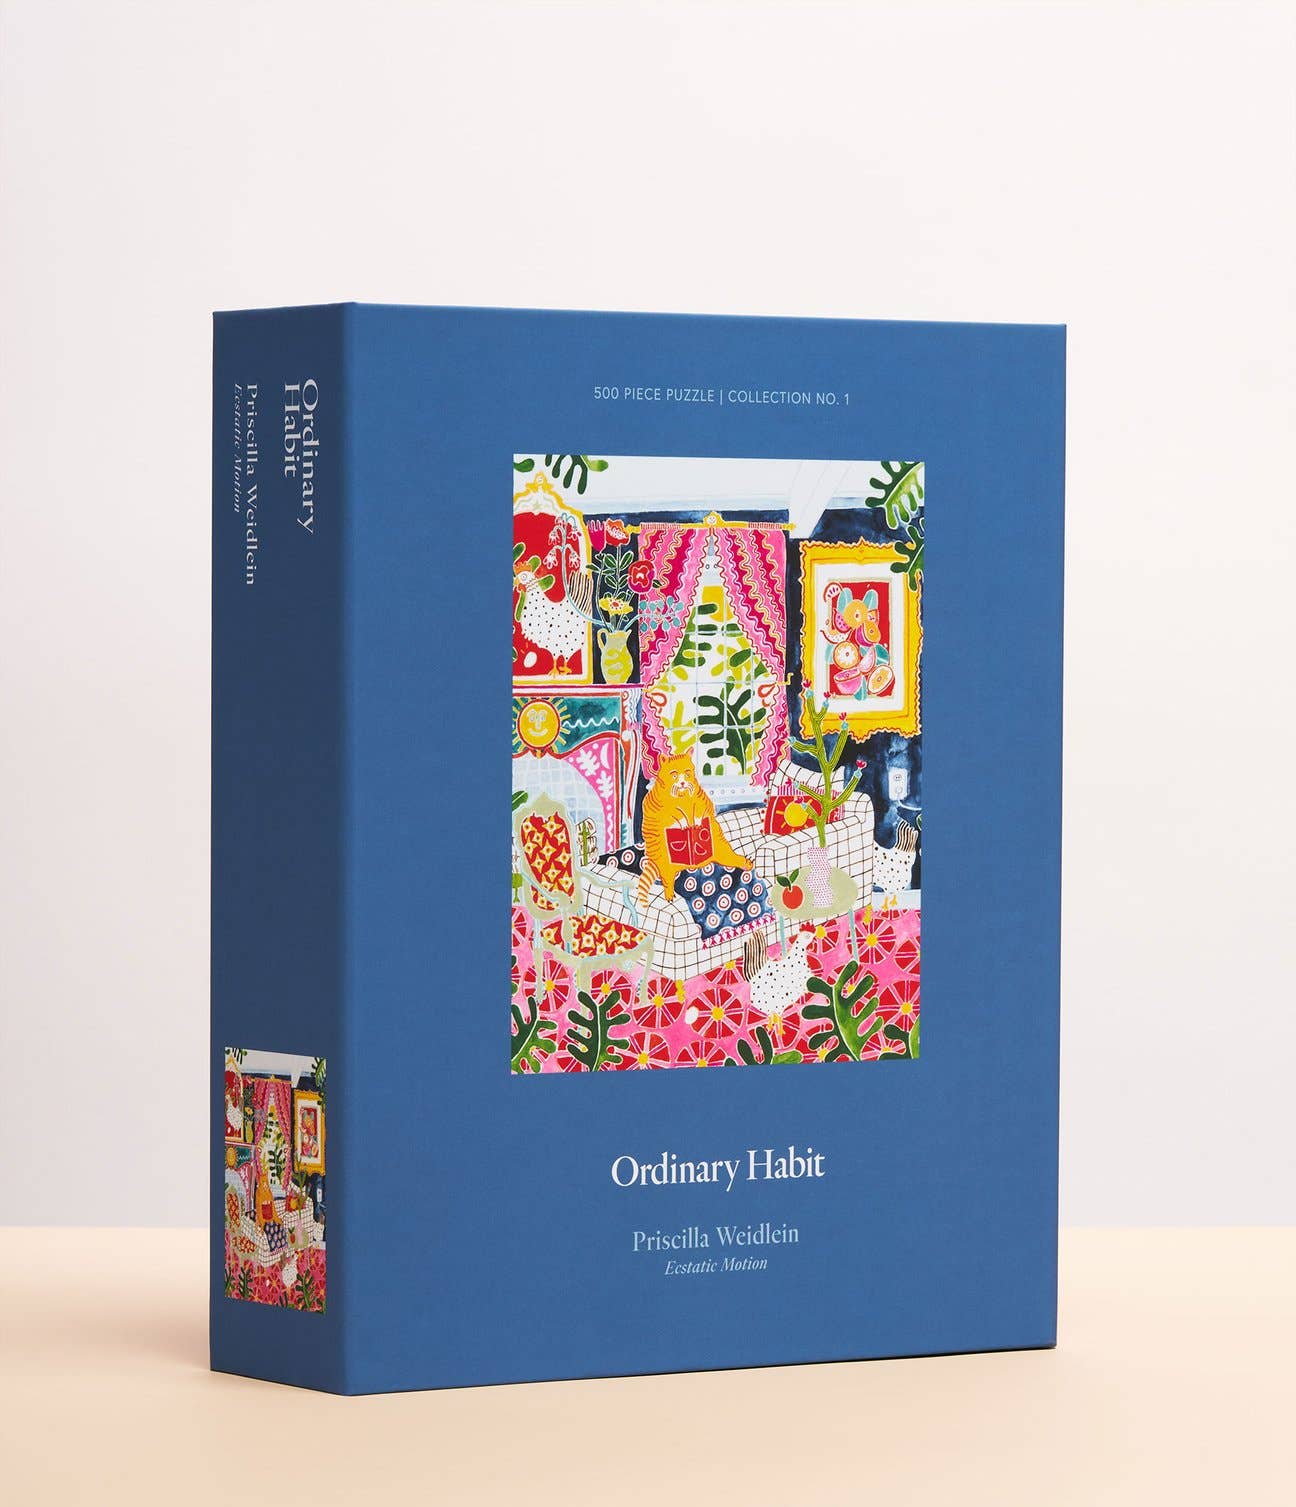 Display box of Ordinary Habit's "Ecstatic Motion" Puzzle. A blue box with the picture of the puzzle in the front depicting a fat cat lounging in a kitschy living room with a grid pattern couch and three chickens strolling through. Vibrant colors and maximalist decor. The box notes that this is a 500 piece puzzle illustrated by Priscilla Weidlein.